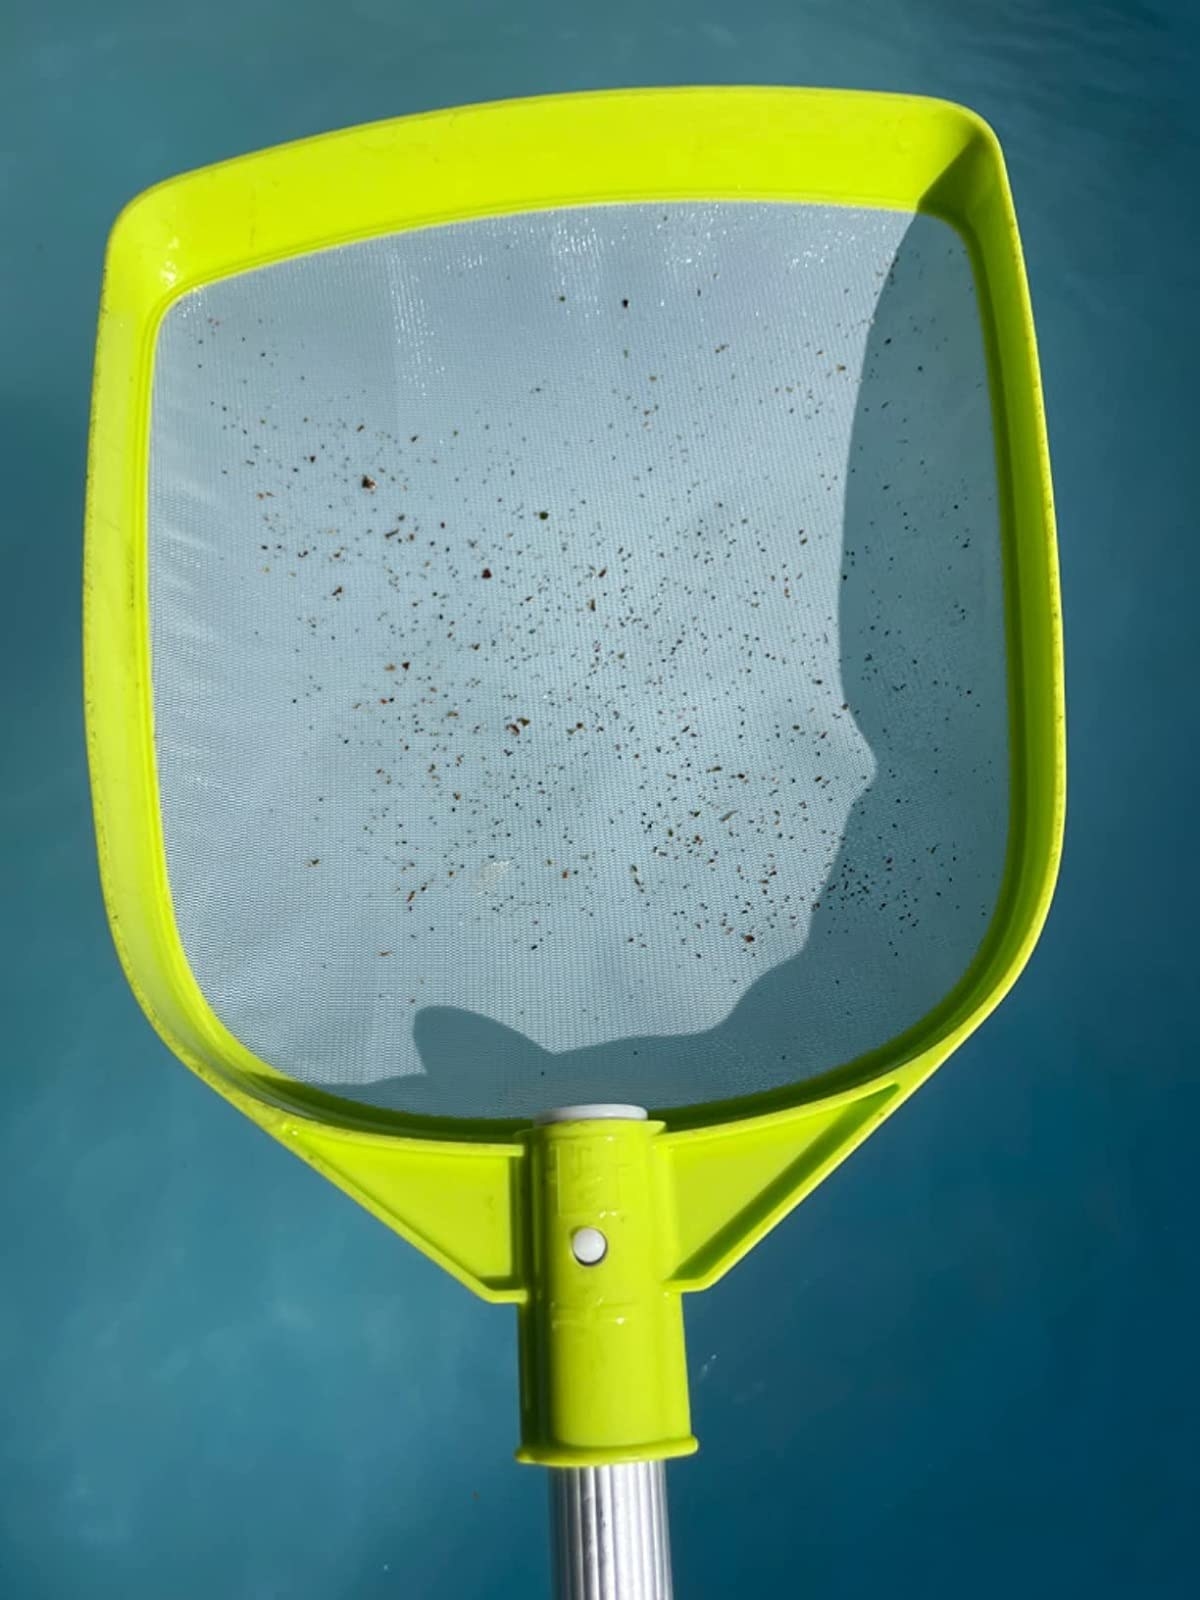 Lime green colored pool skimmer with dirt particles inside the net